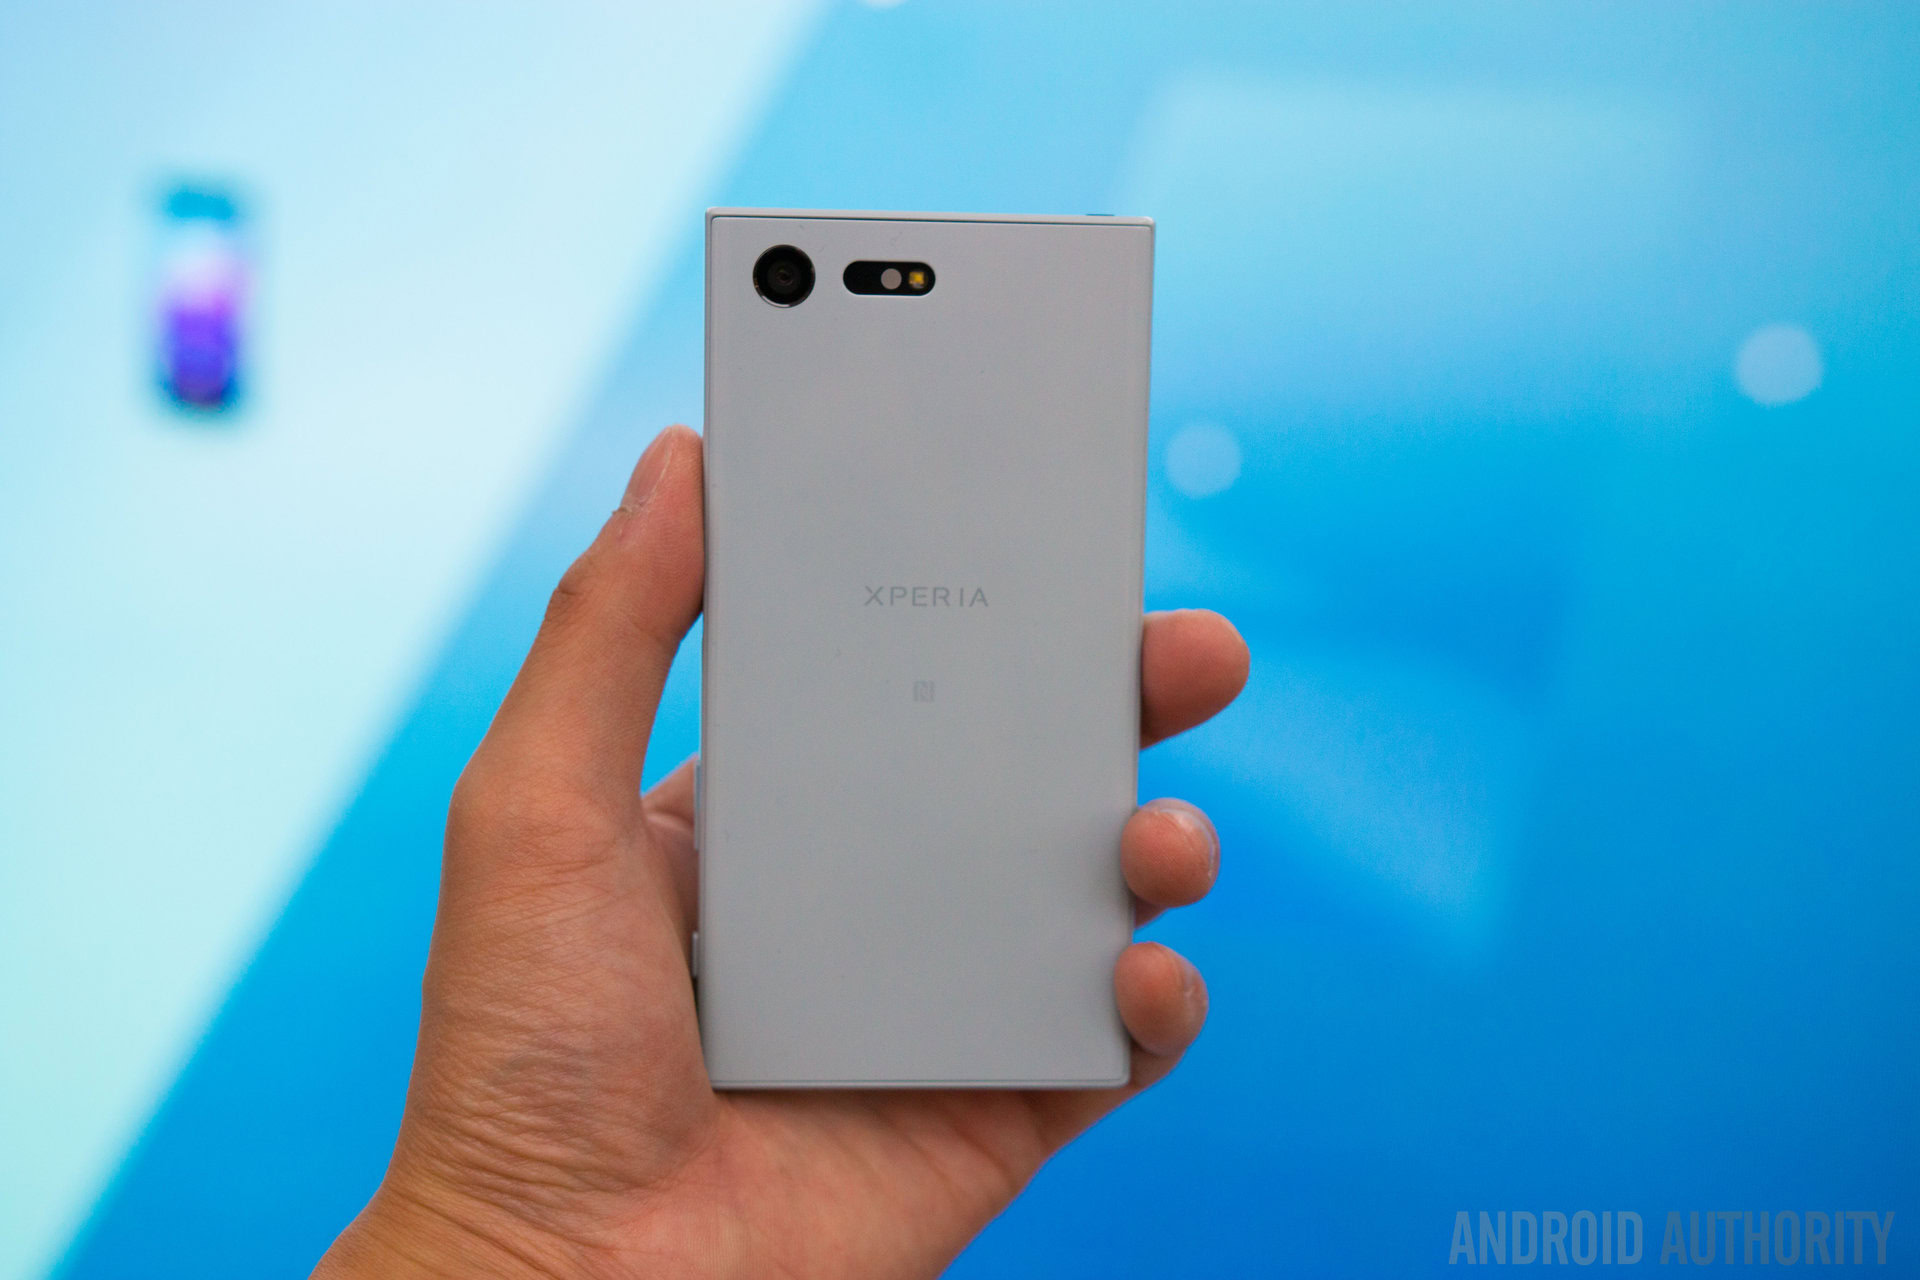 Sony Xperia Compact hands on review - Android Authority